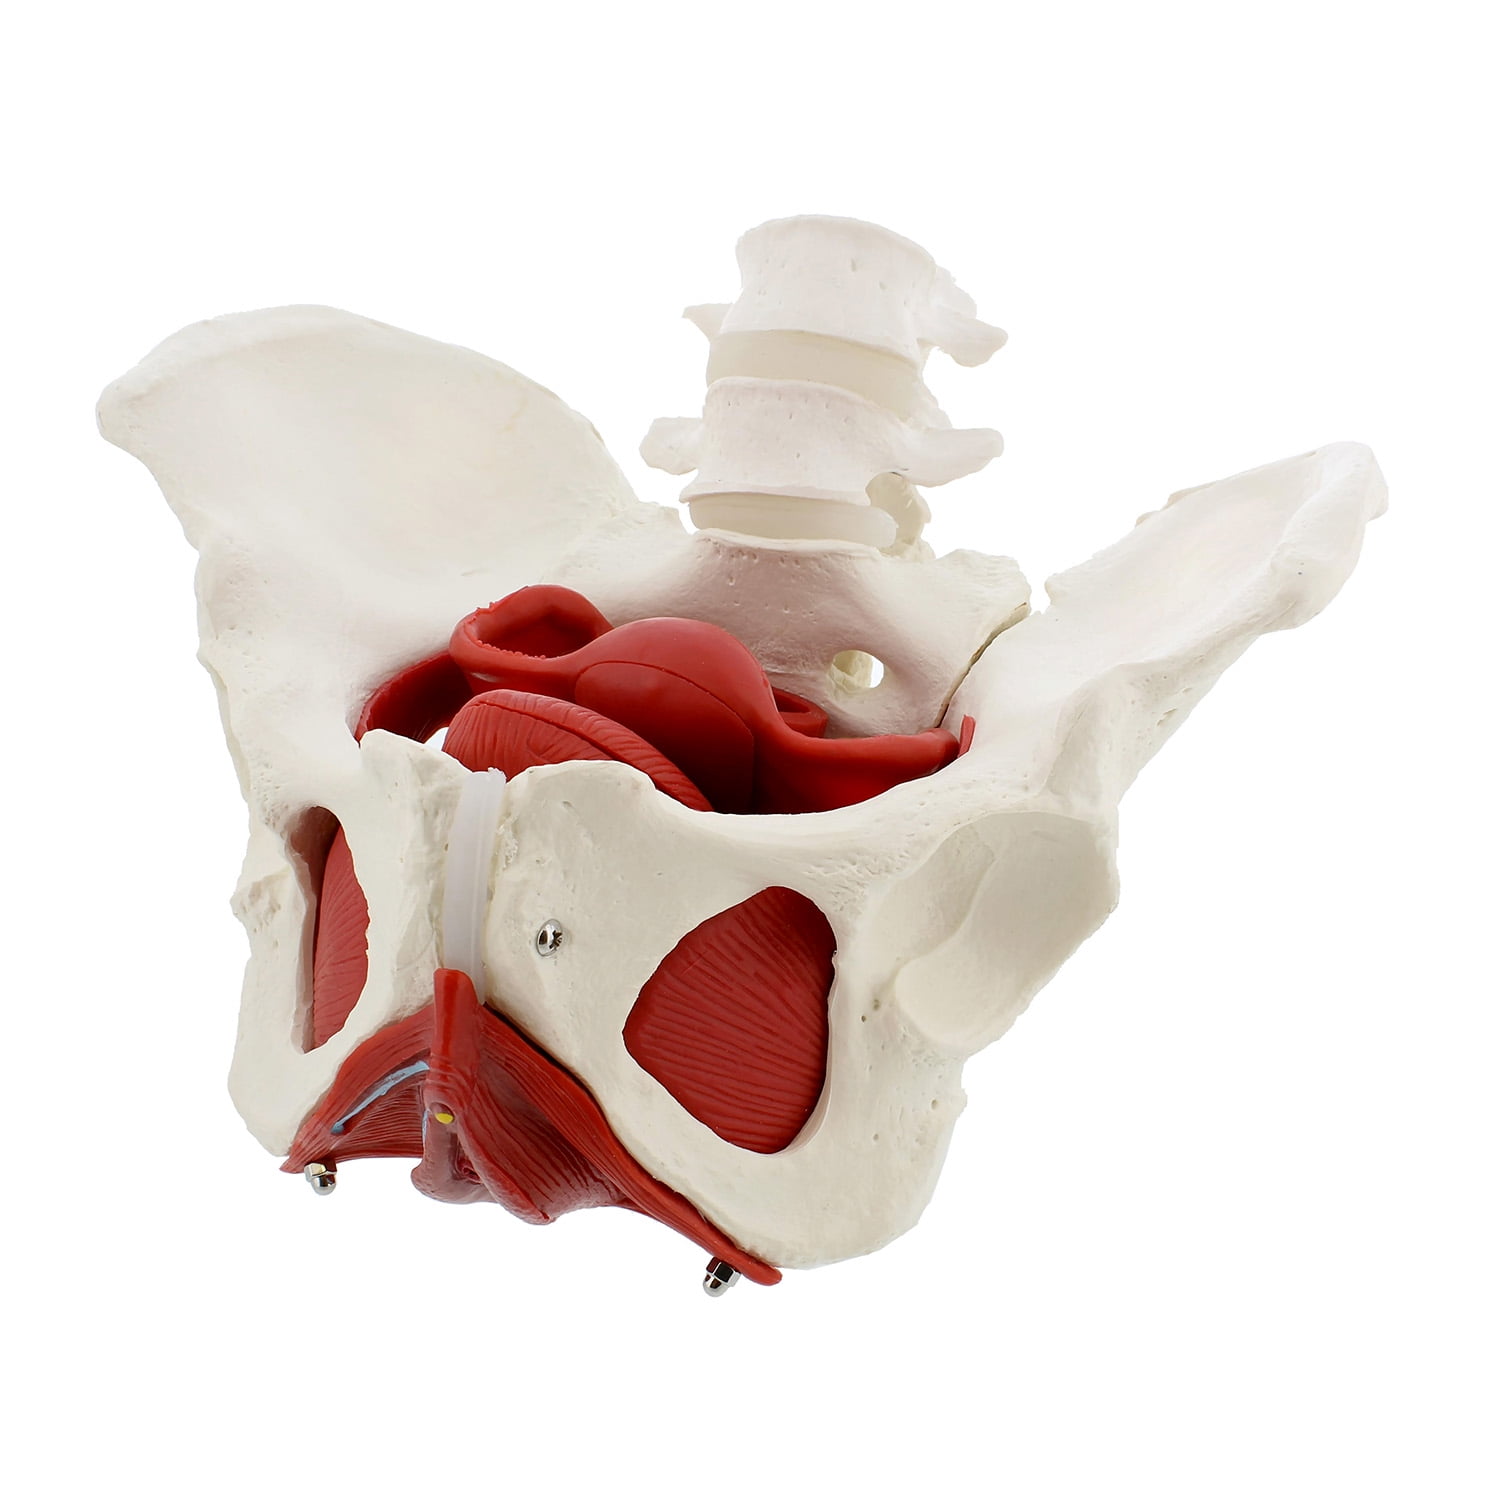 MonMed Pelvic Model 6pc Life Size Anatomical Female Pelvis Model with  Muscles